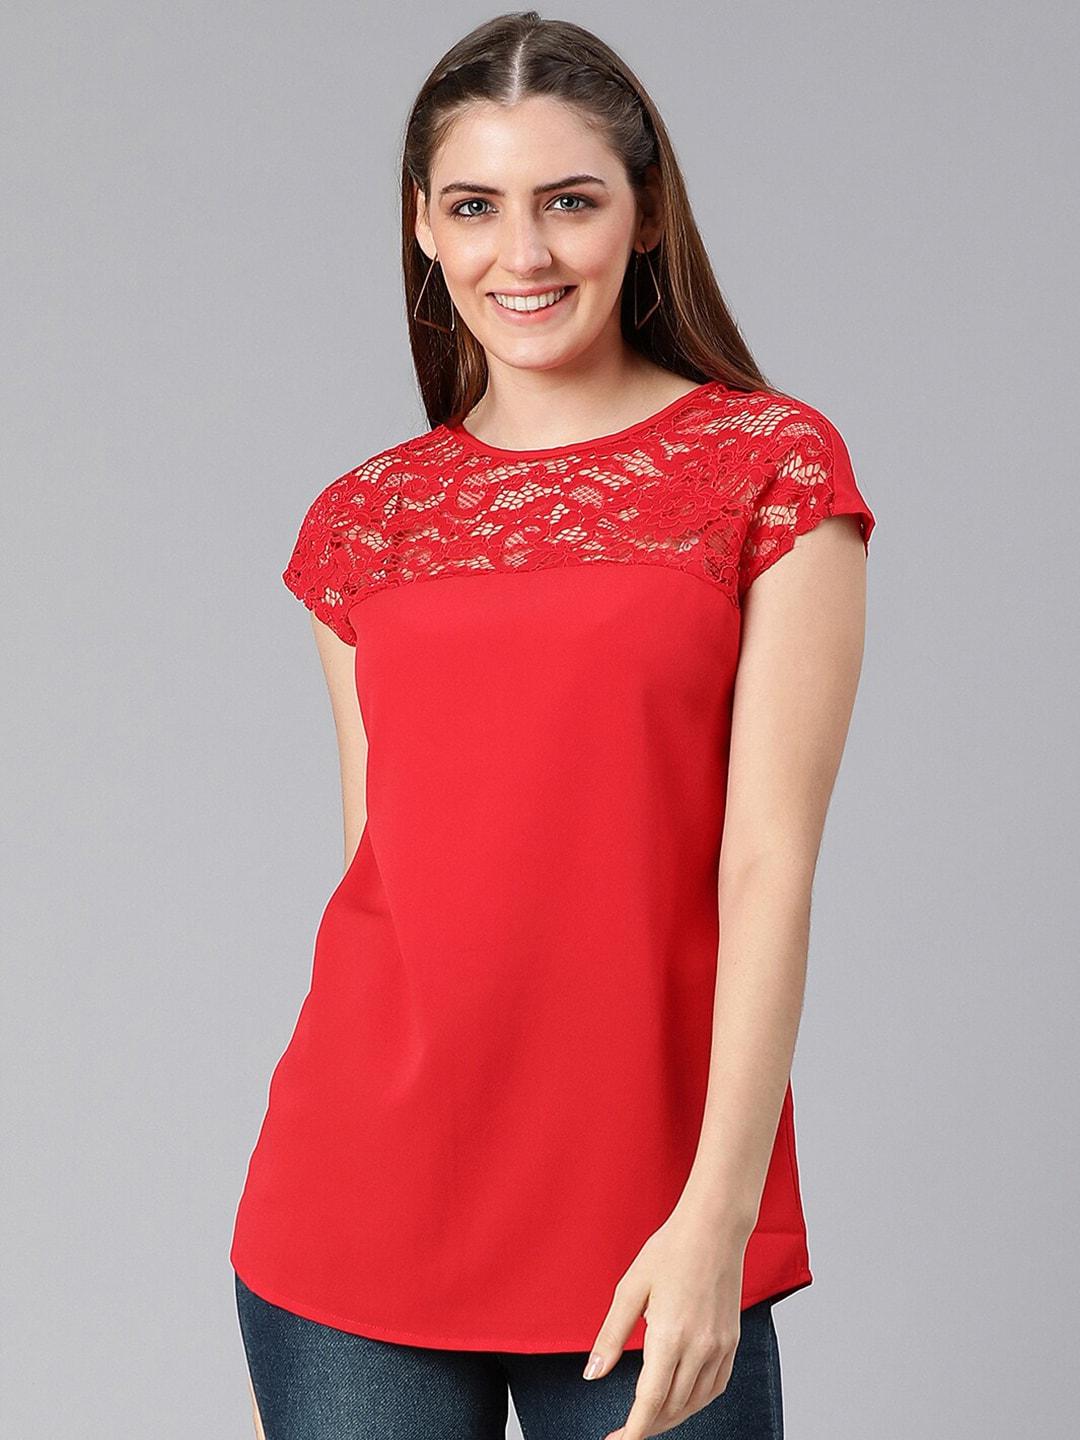 oxolloxo-women-red-solid-laced-top